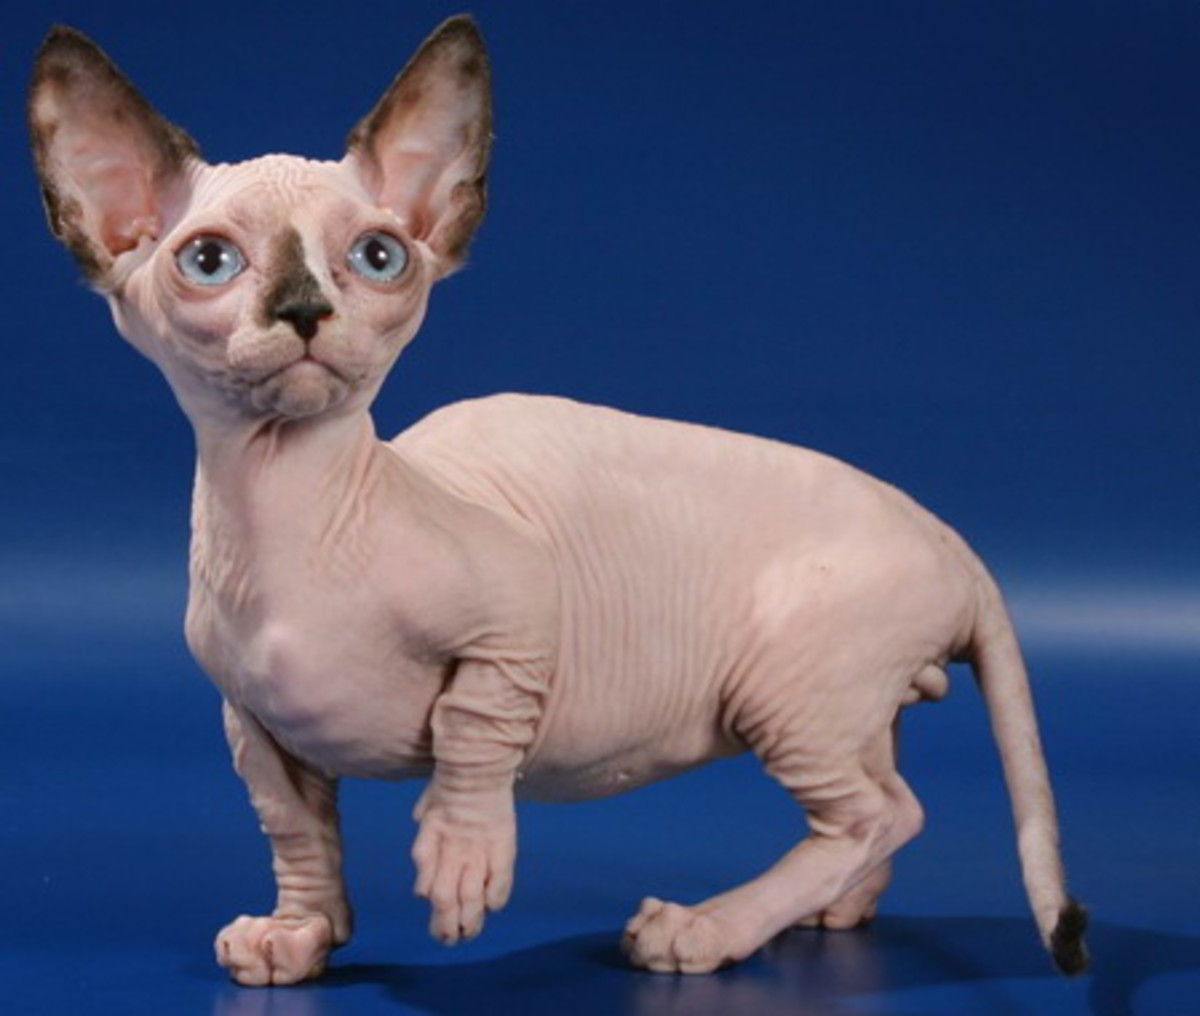 7 Hairless Cat Breeds Cats Without Fur Pethelpful By Fellow Animal Lovers And Experts